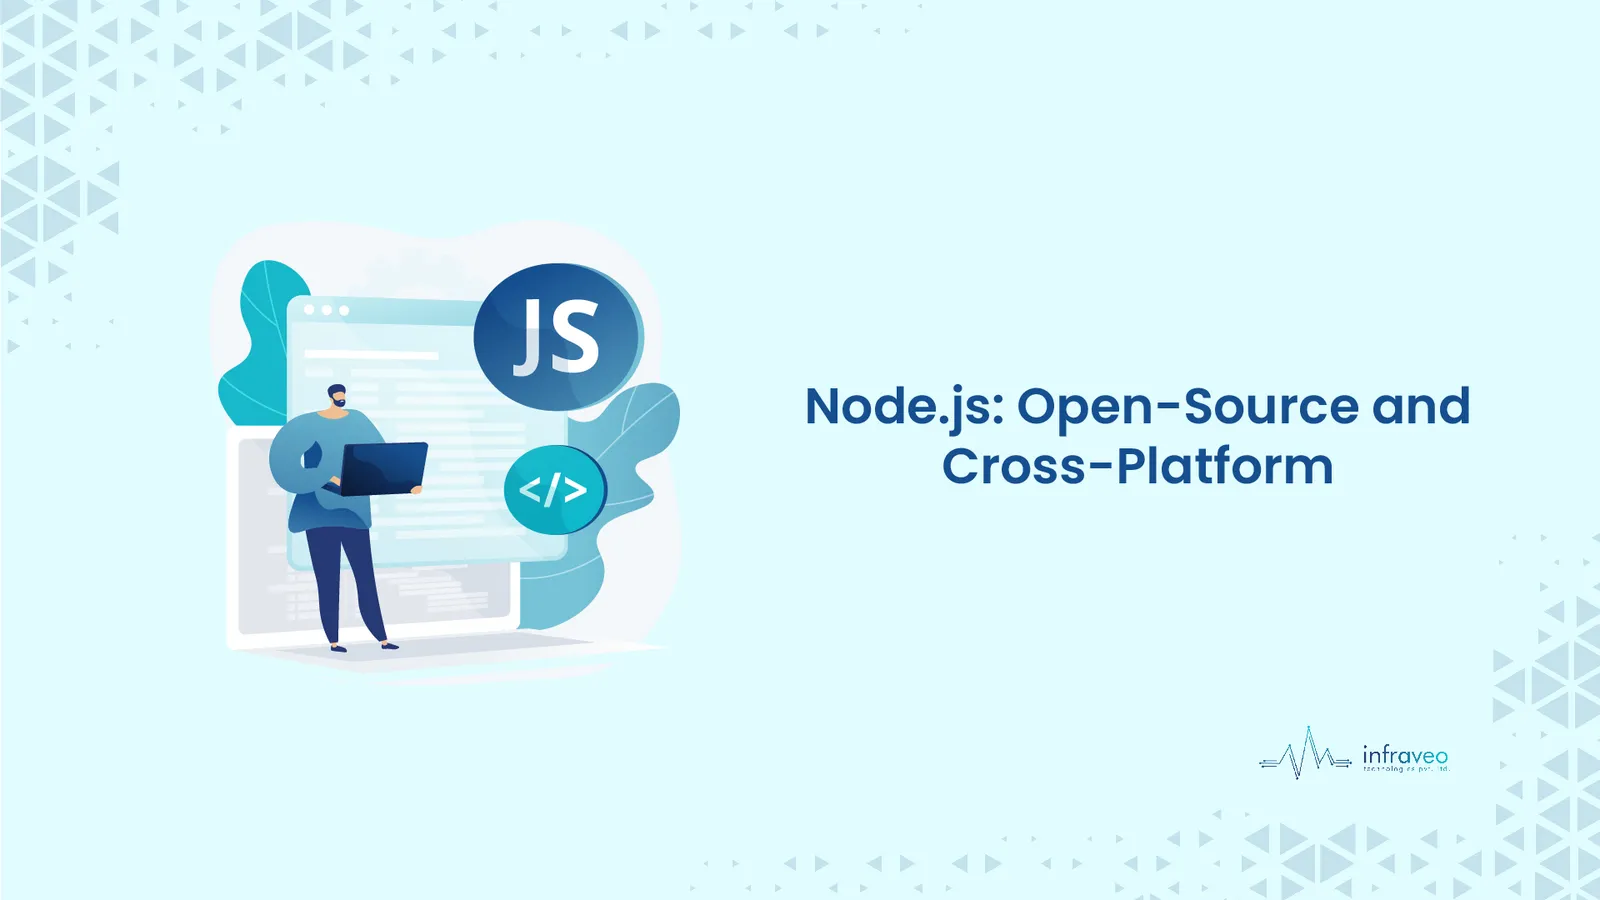 Why Node.js is great for web development?